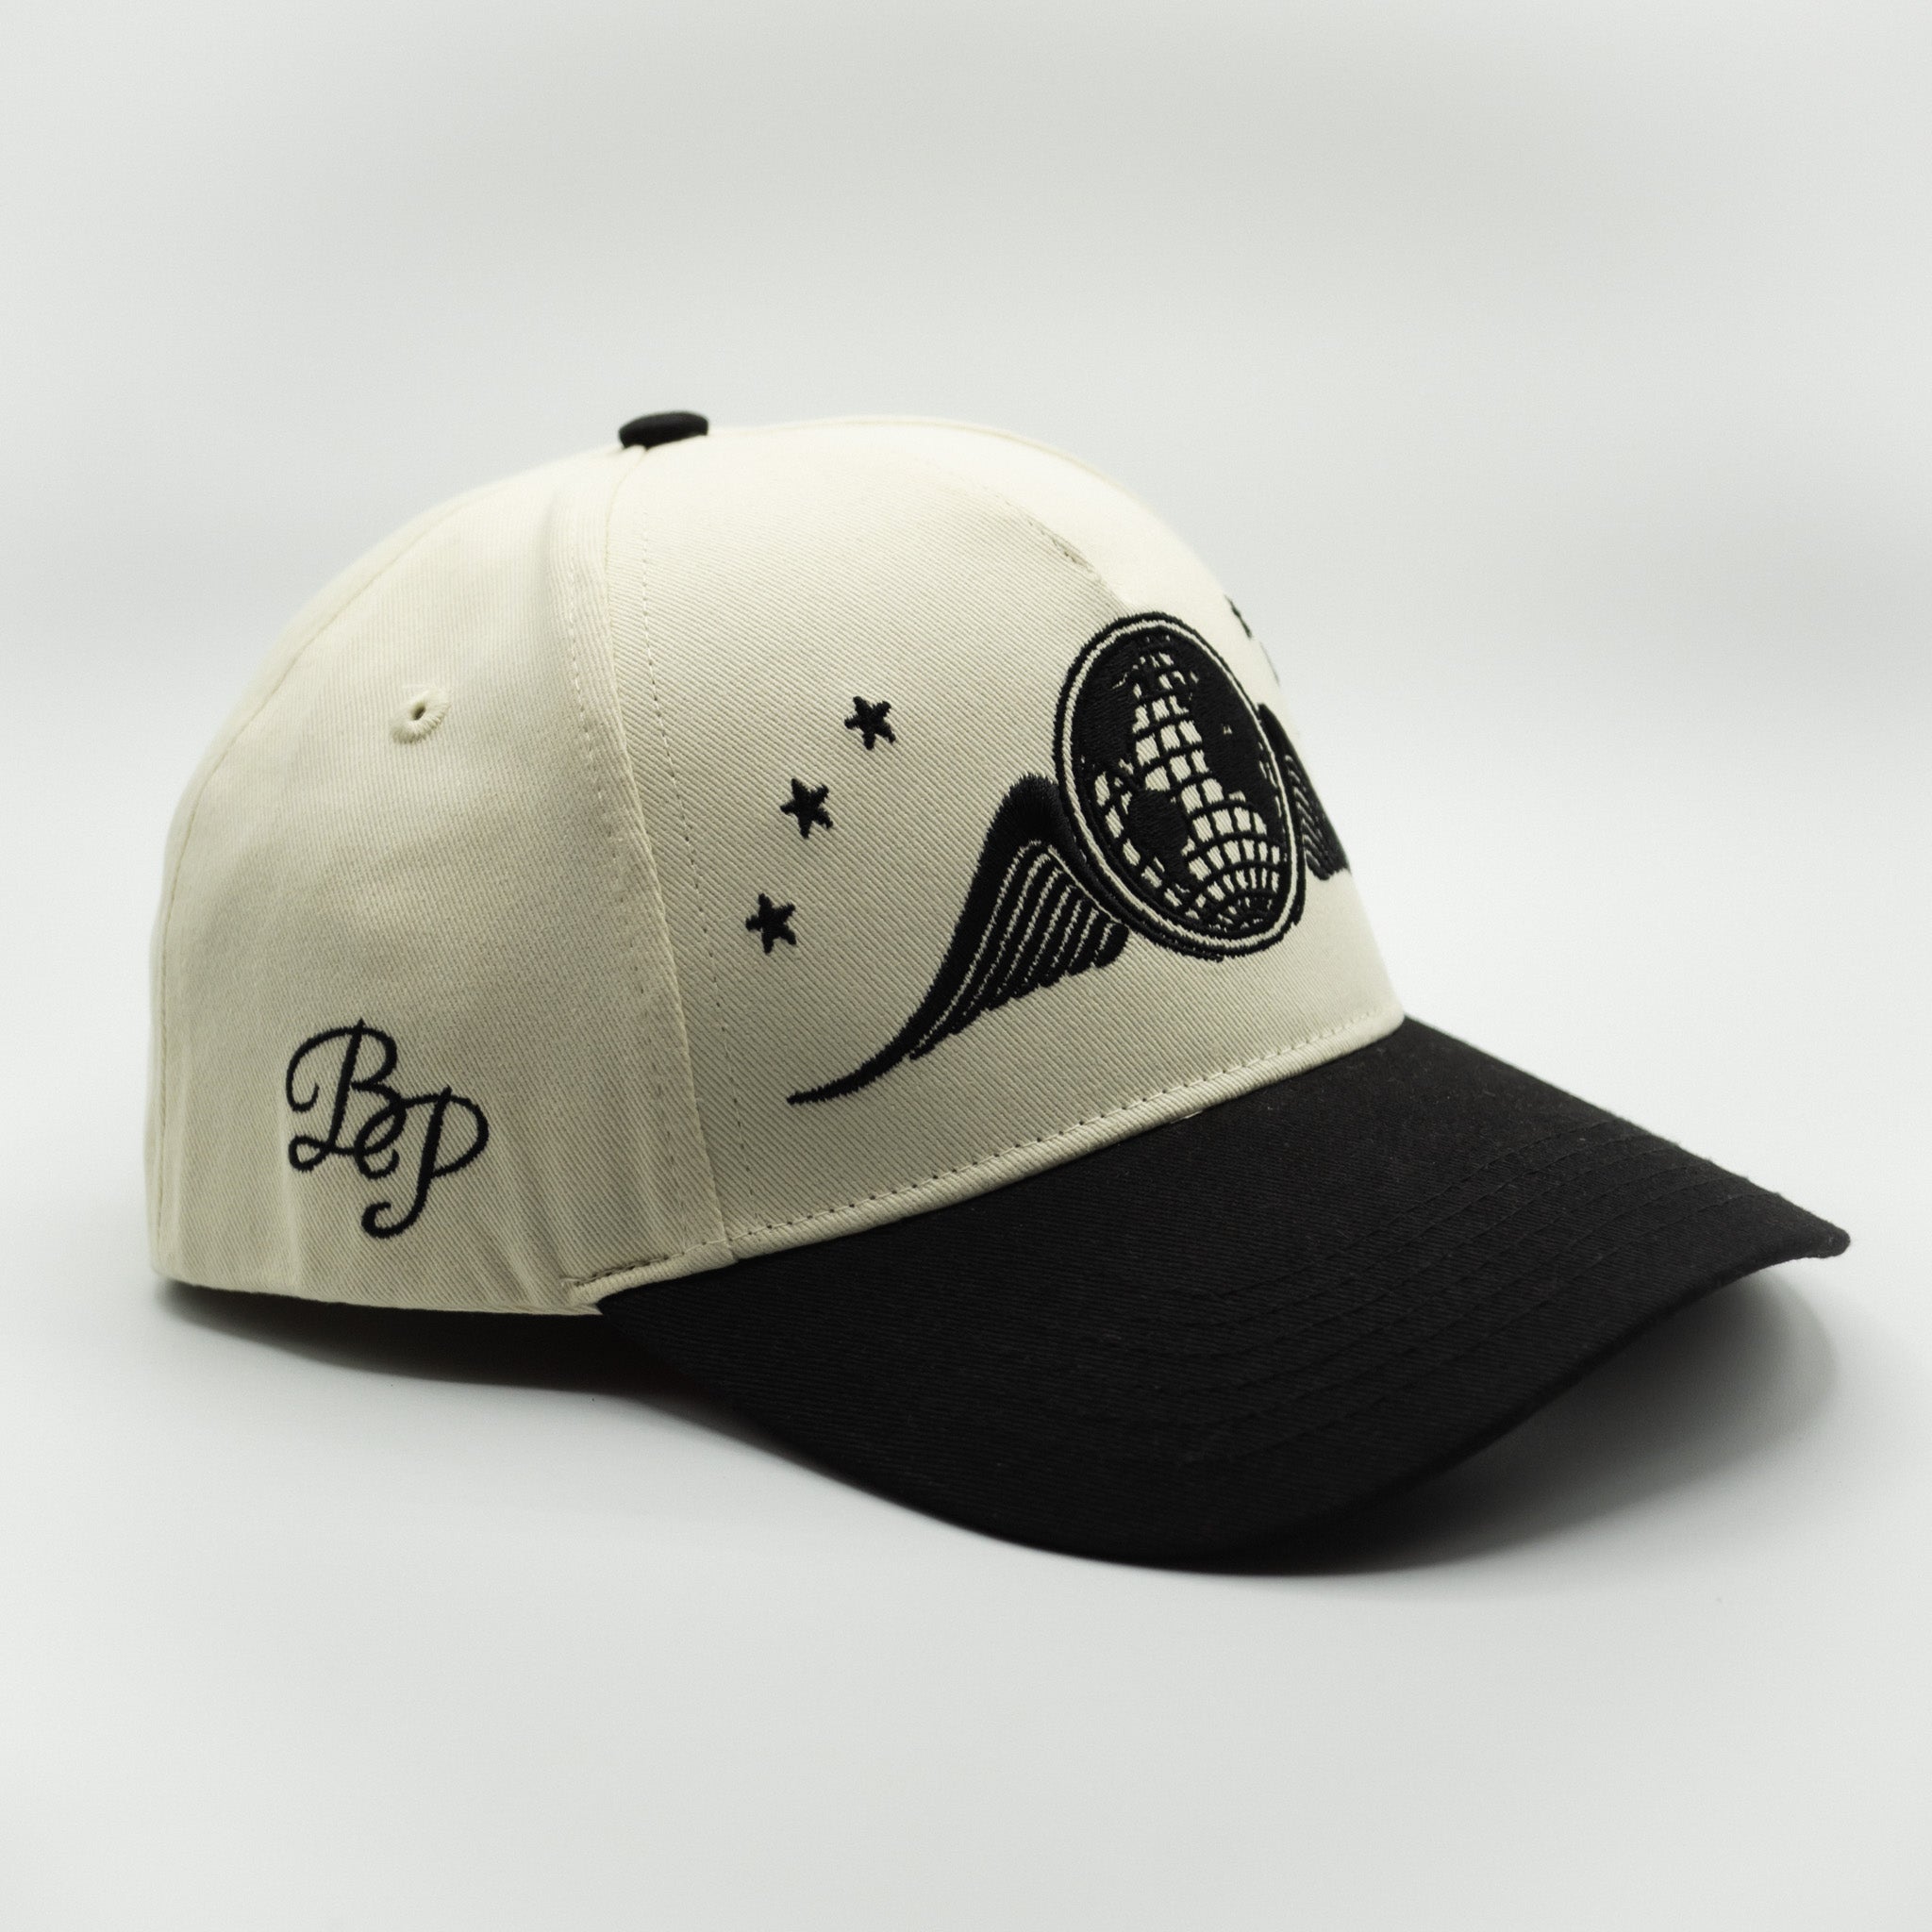 AIR PIERRE Snap-back Hat